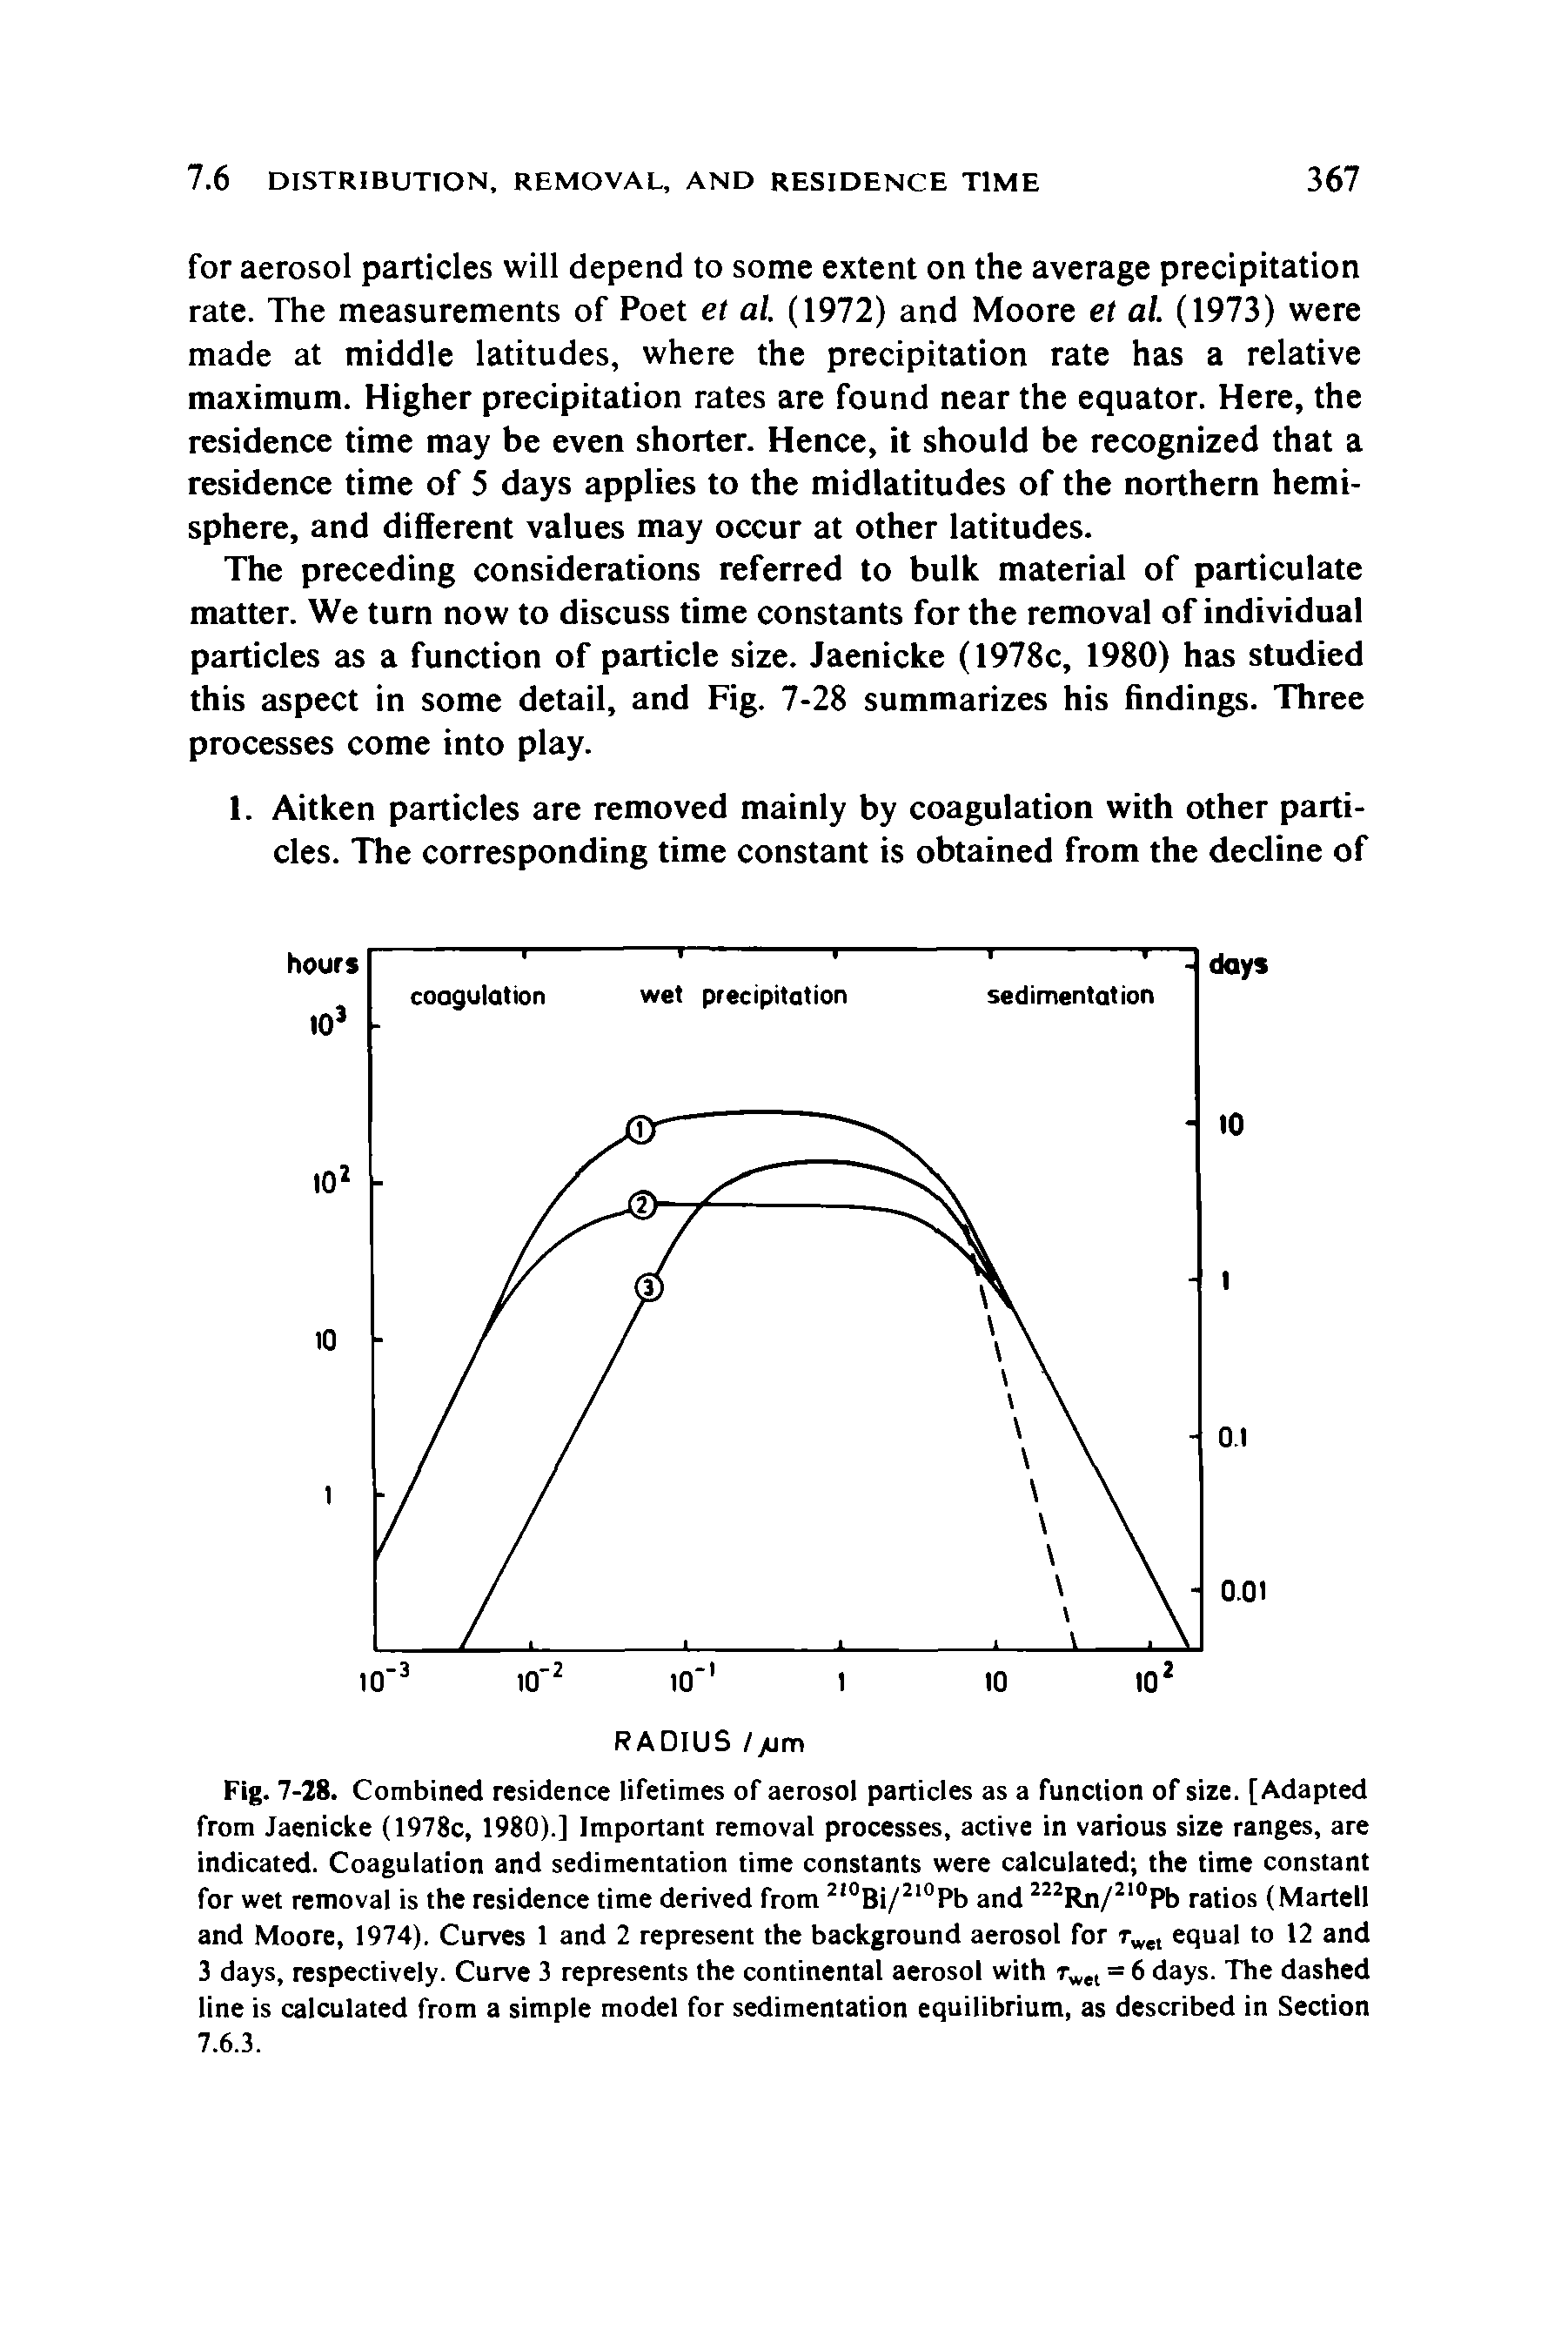 Fig. 7-28. Combined residence lifetimes of aerosol particles as a function of size. [Adapted from Jaenicke (1978c, 1980).] Important removal processes, active in various size ranges, are indicated. Coagulation and sedimentation time constants were calculated the time constant for wet removal is the residence time derived from 2,0Bi/210Pb and 222Rn/210Pb ratios (Martell and Moore, 1974). Curves 1 and 2 represent the background aerosol for rwel equal to 12 and 3 days, respectively. Curve 3 represents the continental aerosol with rwel = 6 days. The dashed line is calculated from a simple model for sedimentation equilibrium, as described in Section 7.6.3.